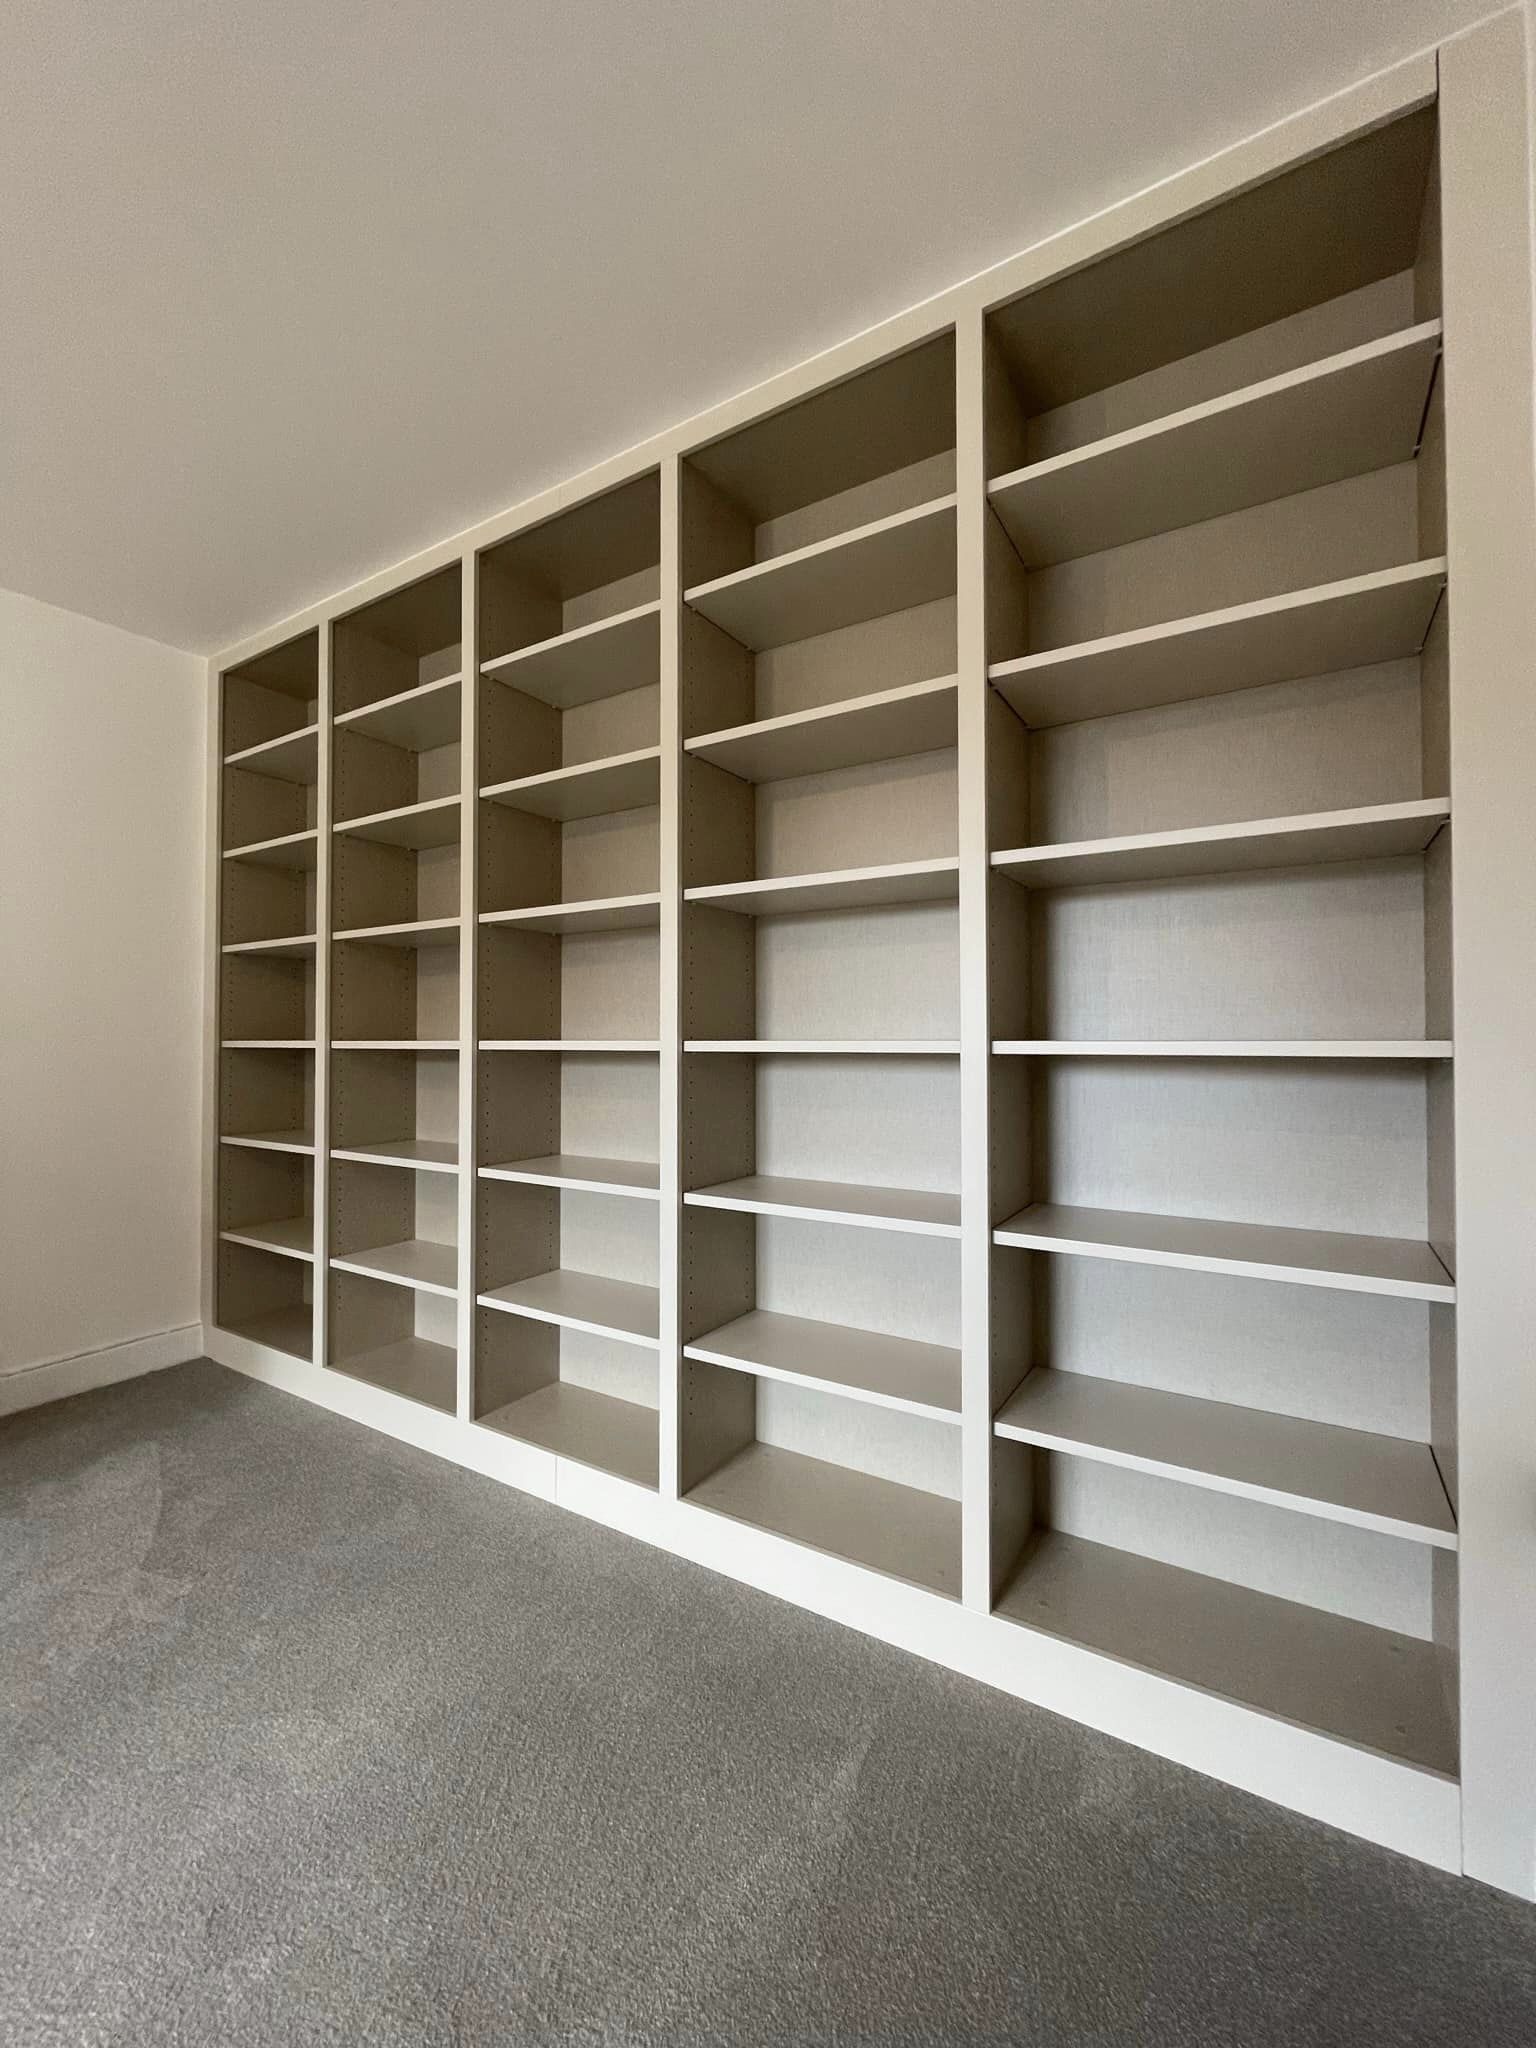 Large built in bookshelf with lino cancun interiors